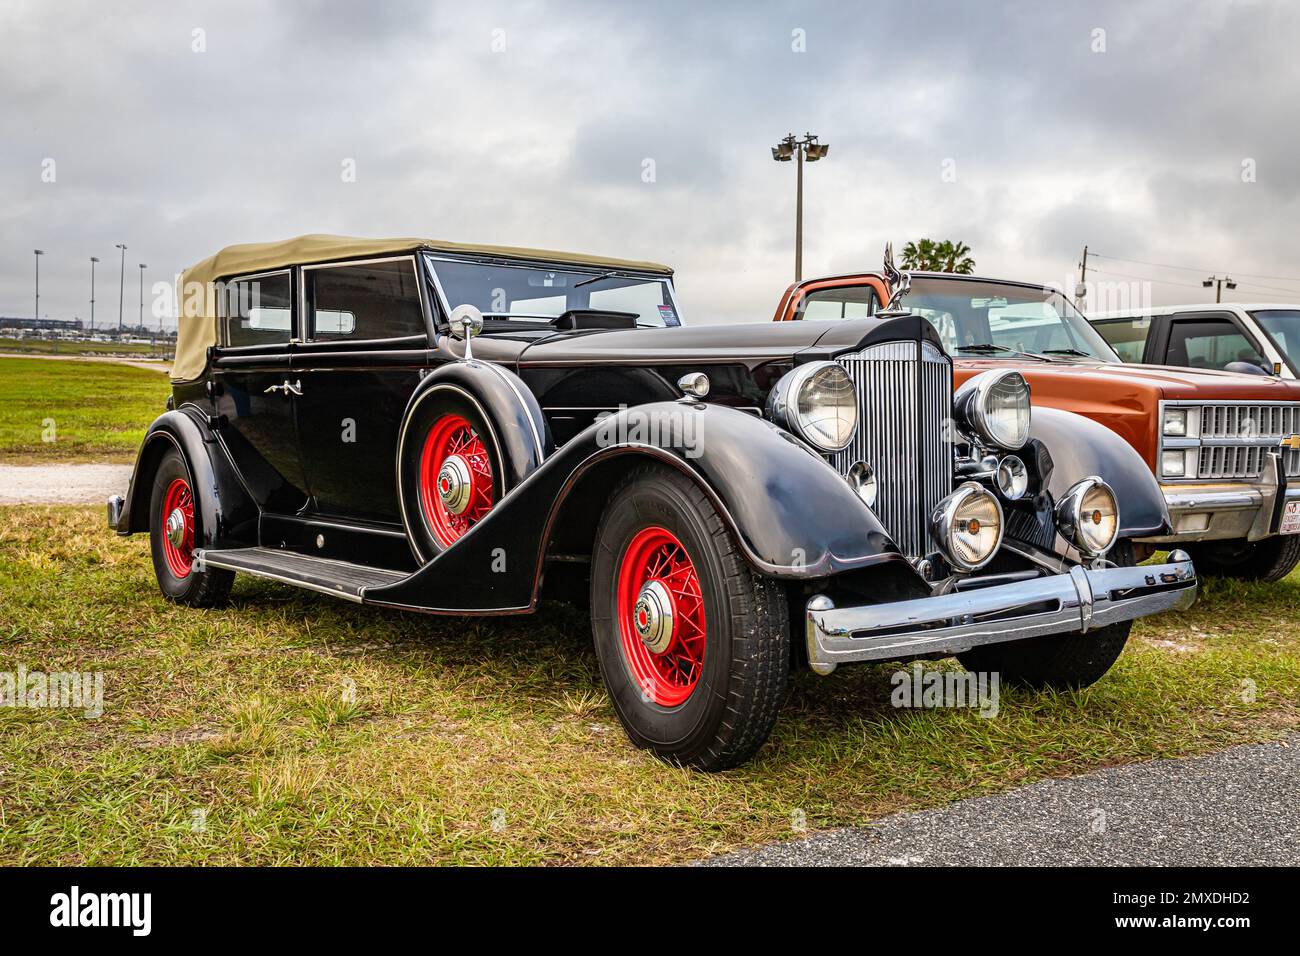 Daytona Beach, FL - November 26, 2022: Low perspective front corner view of a 1934 Packard Super Eight Convertible Sedan at a local car show. Stock Photo